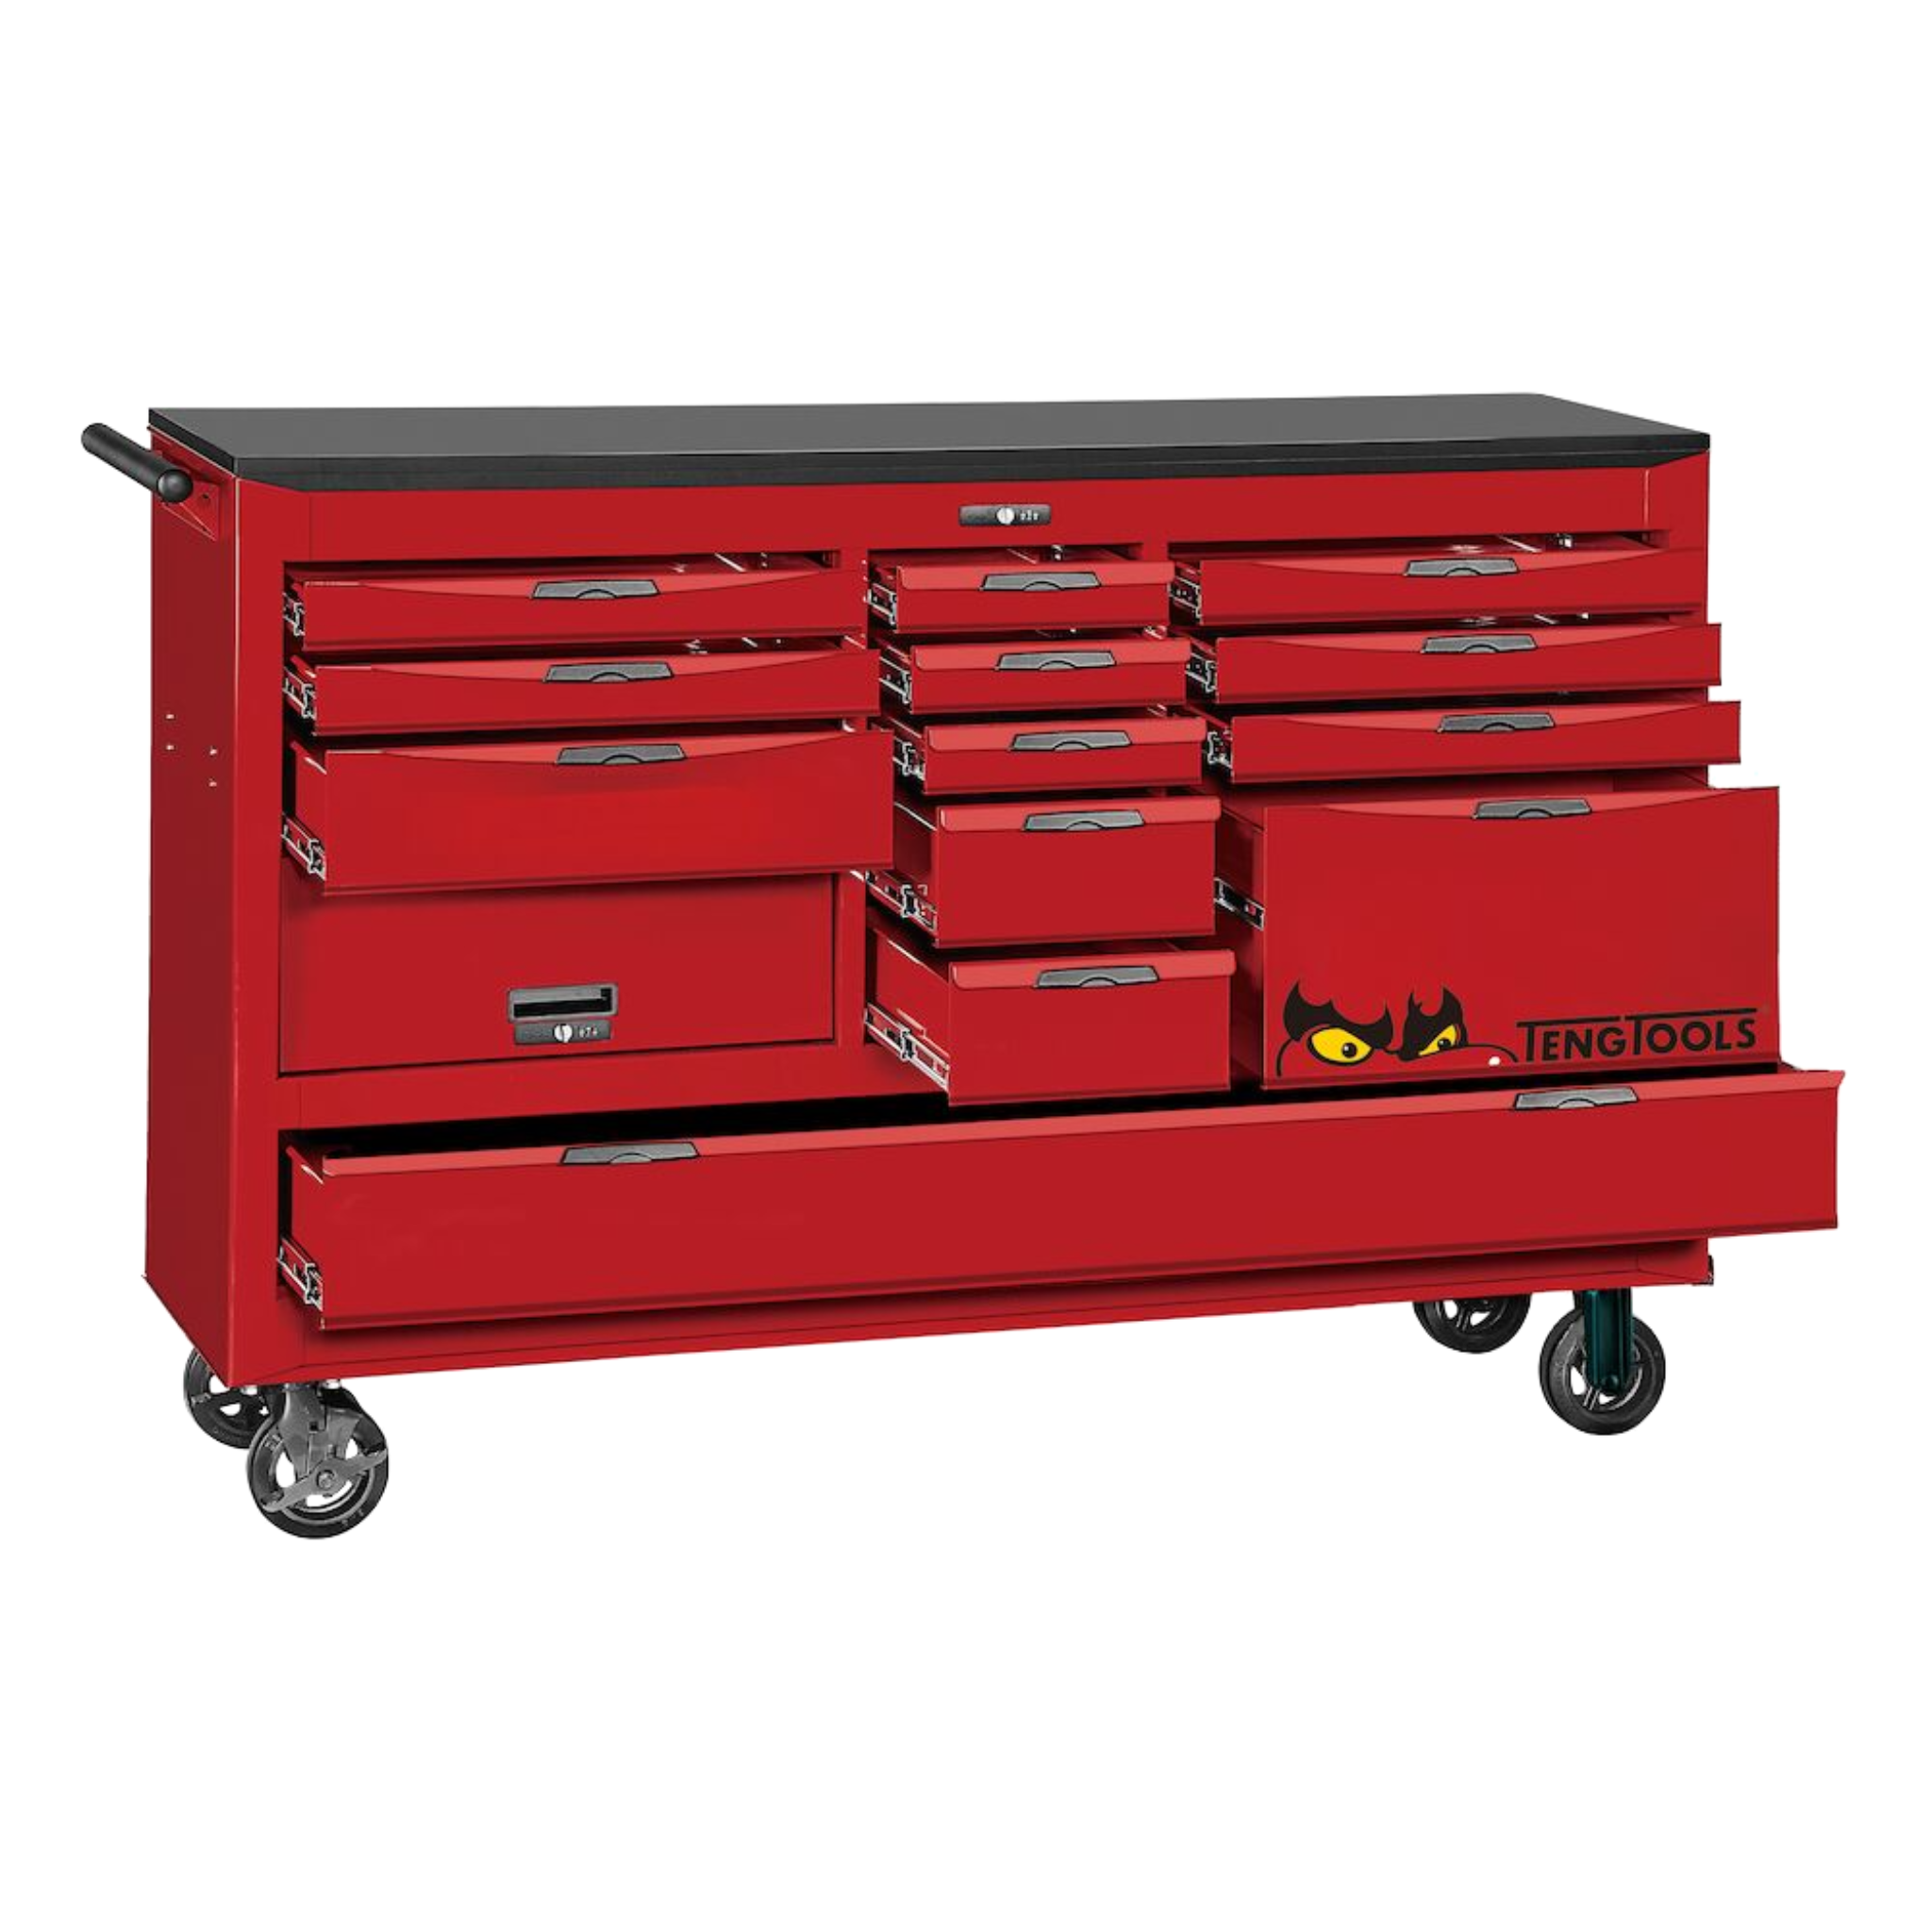 Teng Tools 67 Inch Wide 3 Bay 13 Drawer Roller Cabinet - TCW814N